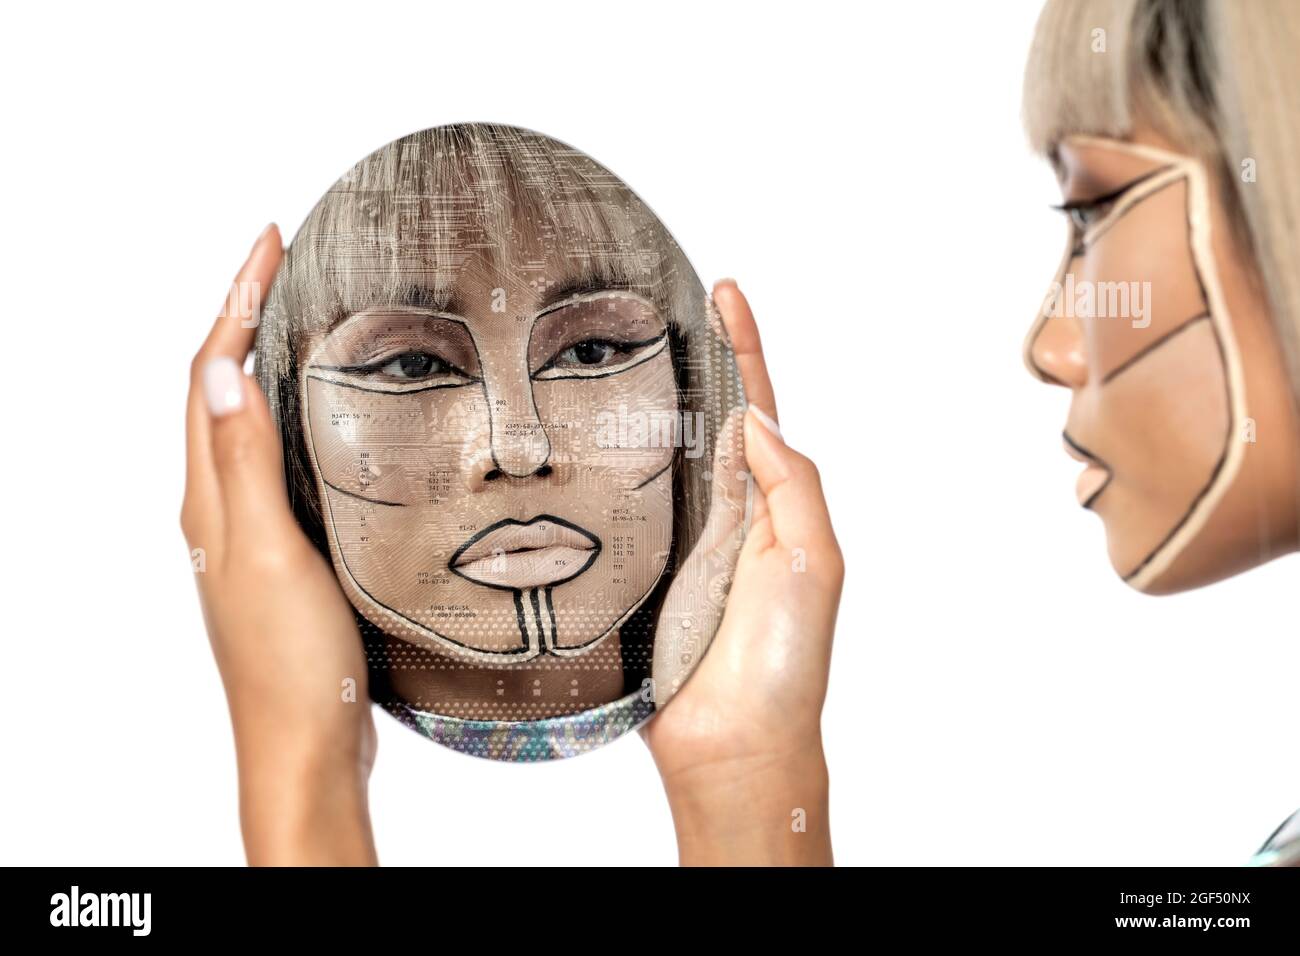 Cyborg woman looking at mirror reflection against white background Stock Photo